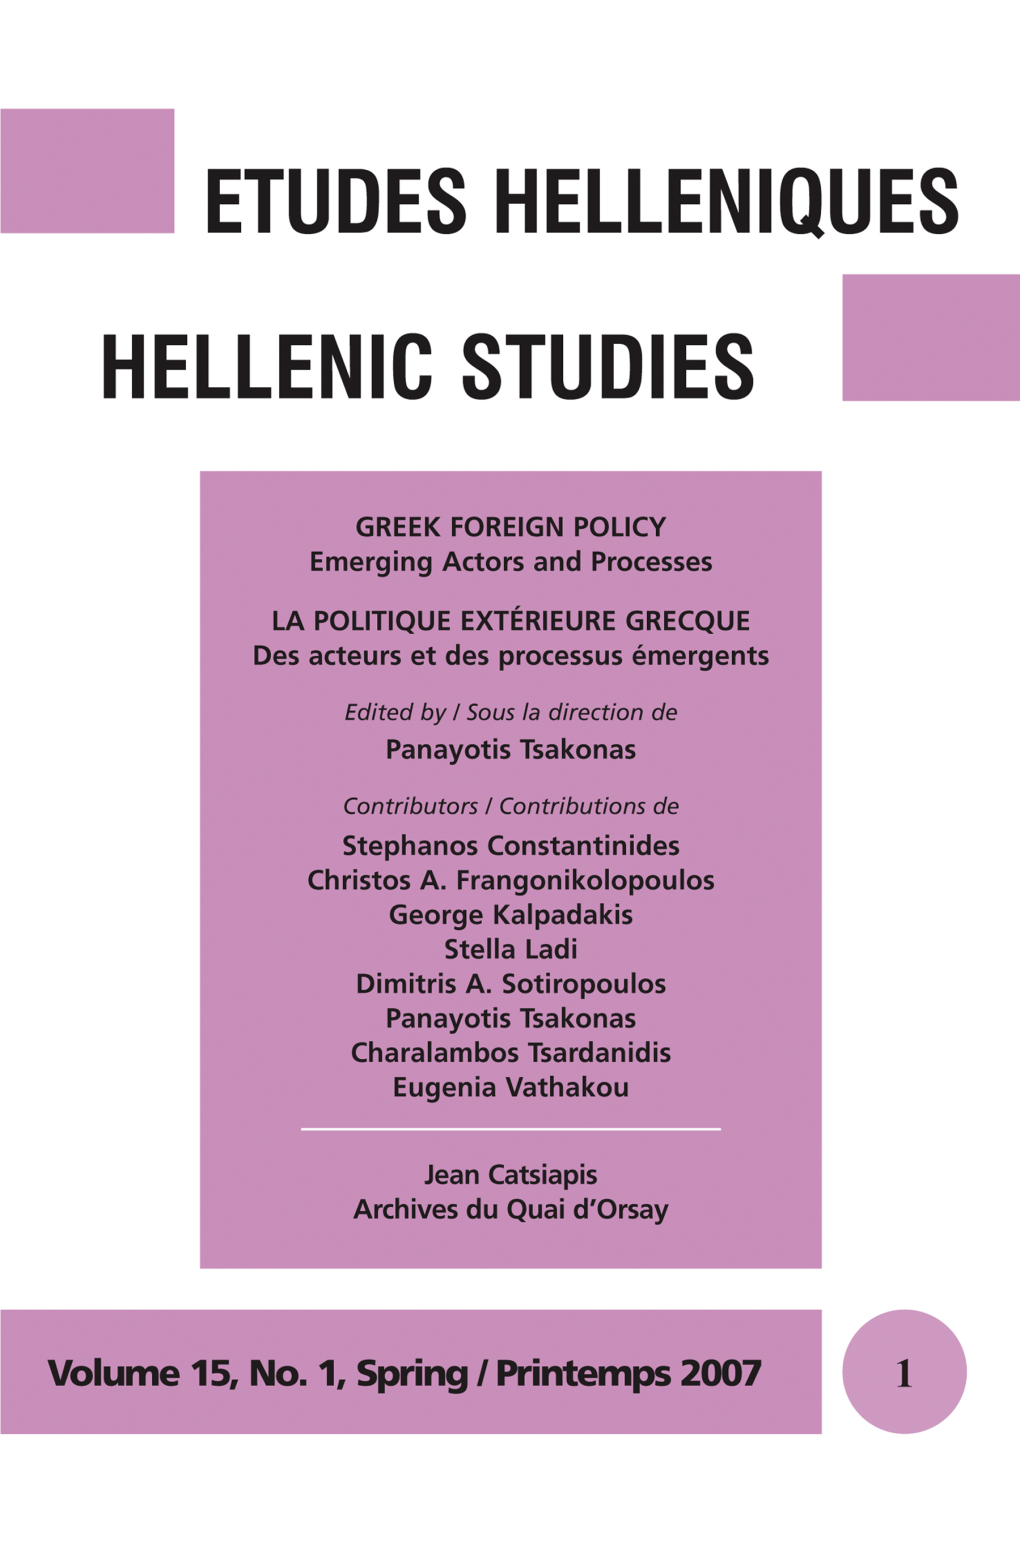 Publication, Books for Review and General Correspondence Should Be Addressed to Études Helléniques/ Hellenic Studies